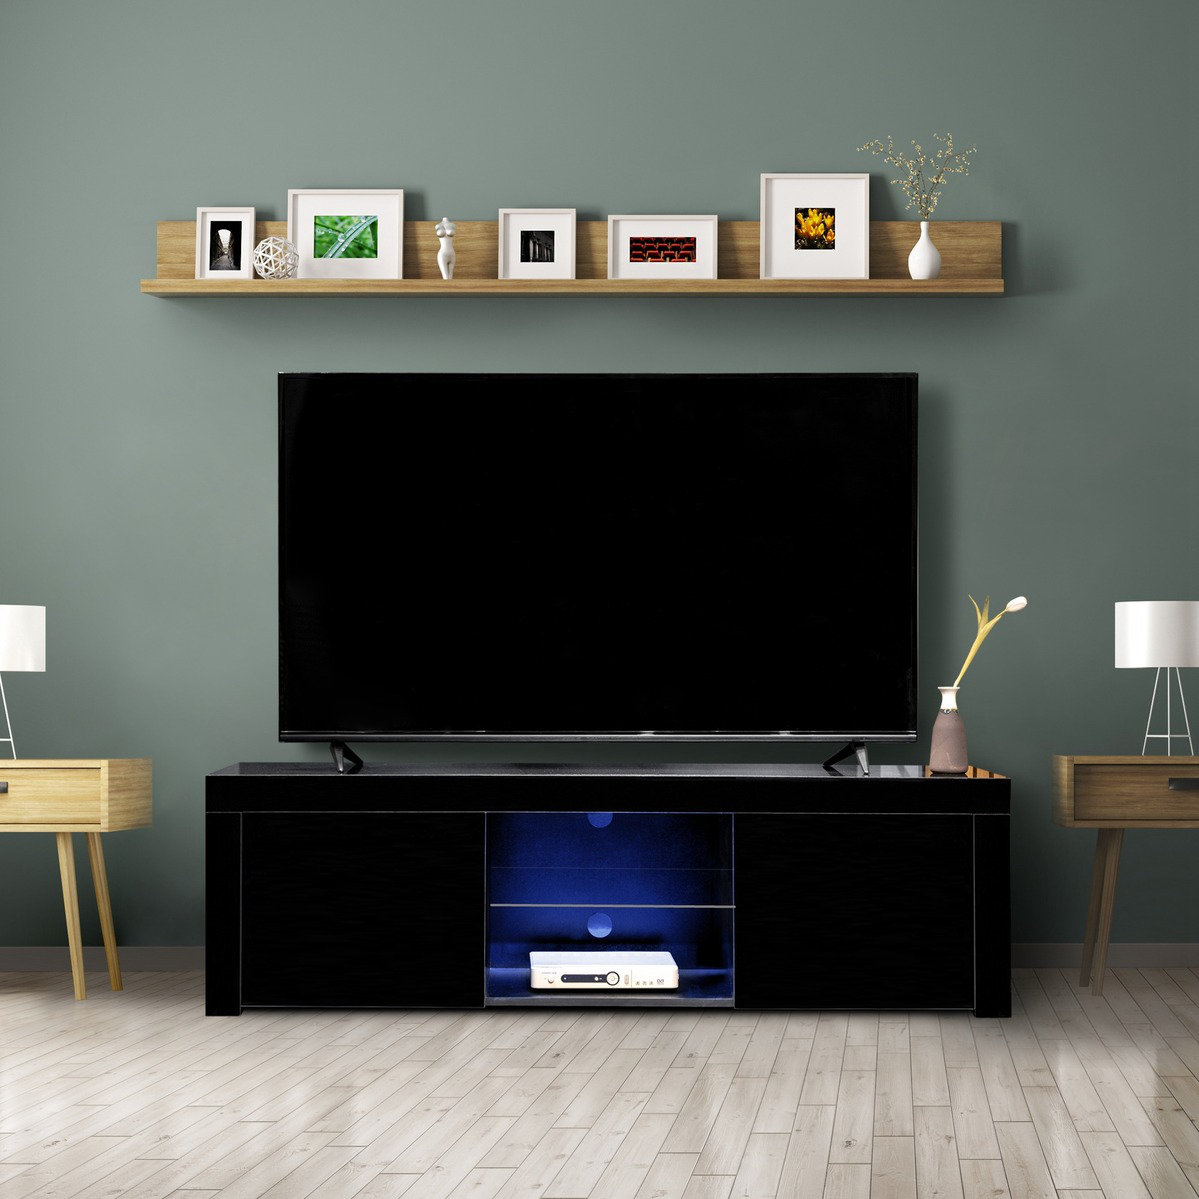 Details about   Universal Floor TV Stand Tall w/Bracket Mount Free Standing For 32-65"LED LCD 